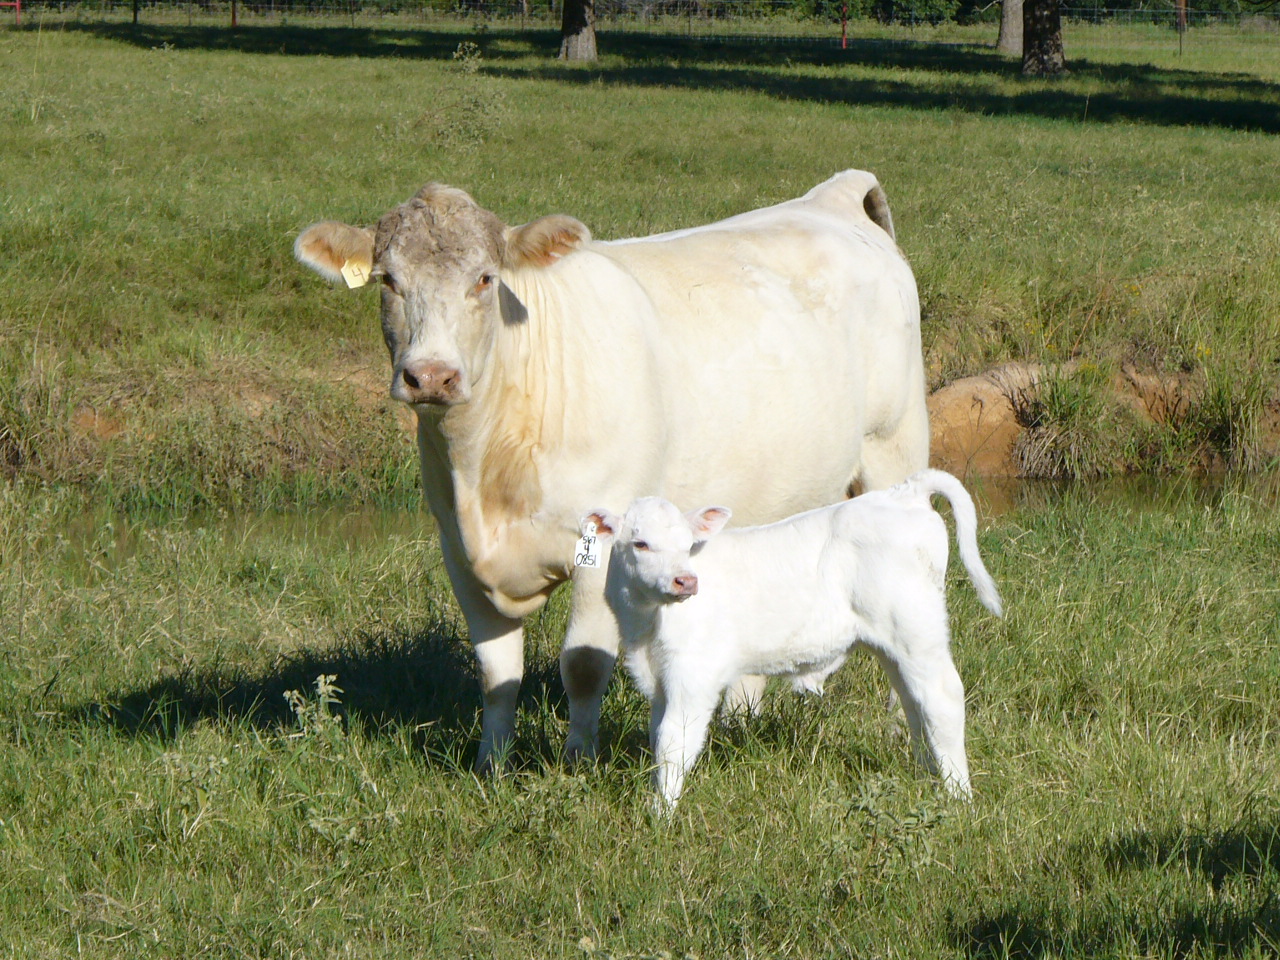 Momma cow with her calf